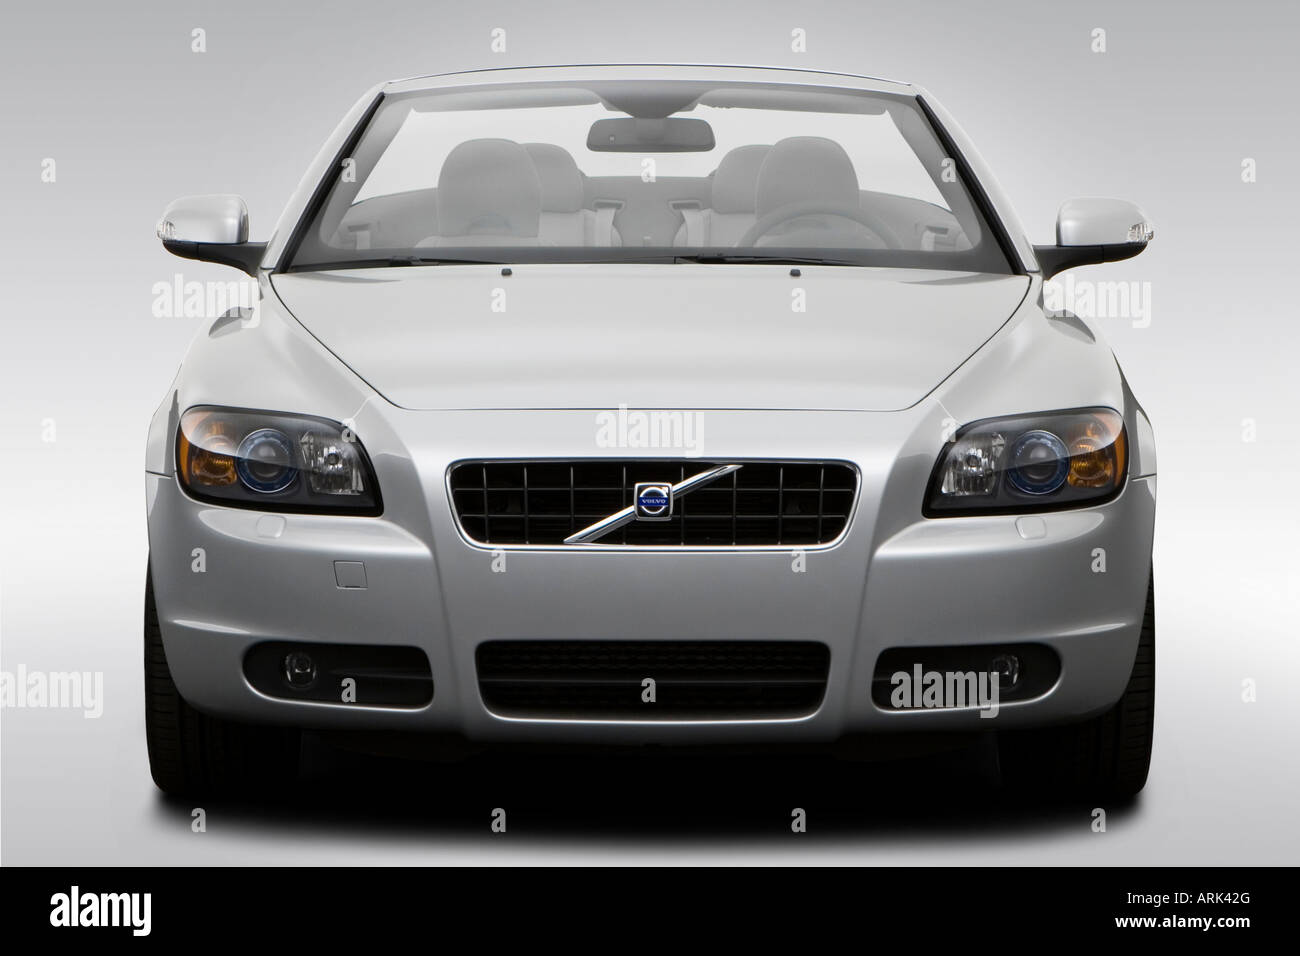 2008 Volvo C70 T5 in Silver - Low/Wide Front Stock Photo - Alamy